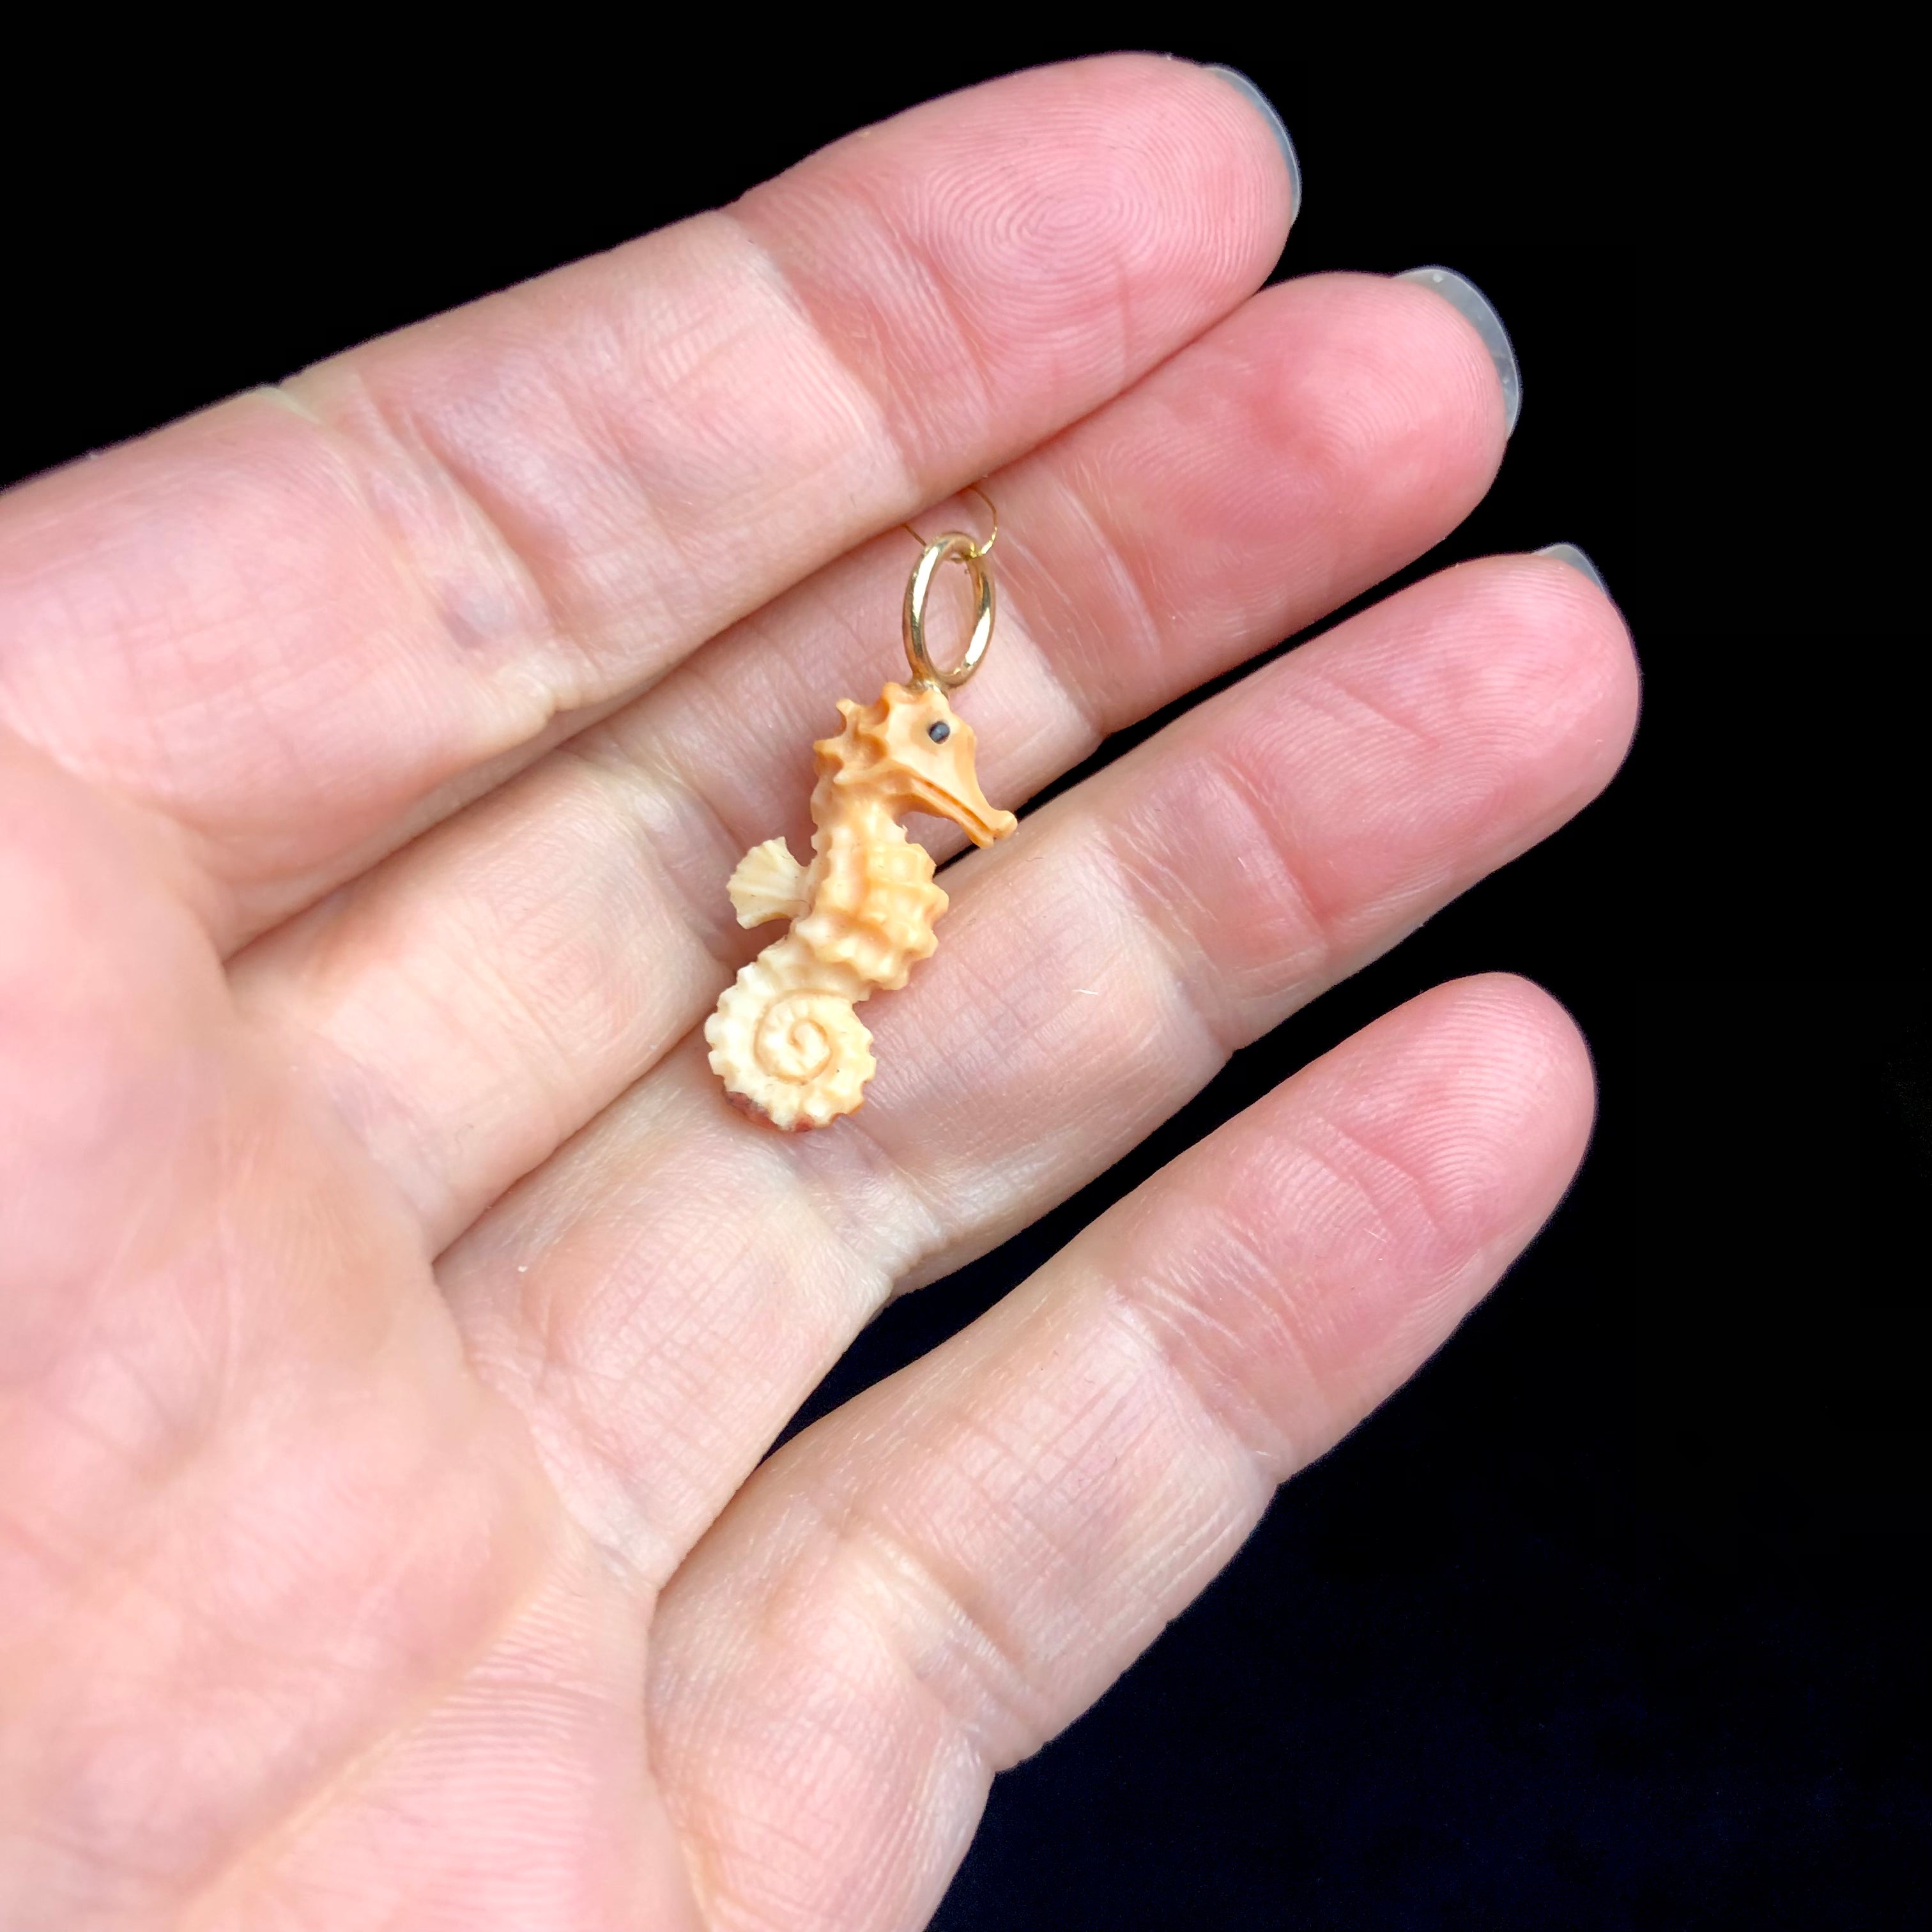 Conch Seahorse Charm shown in hand